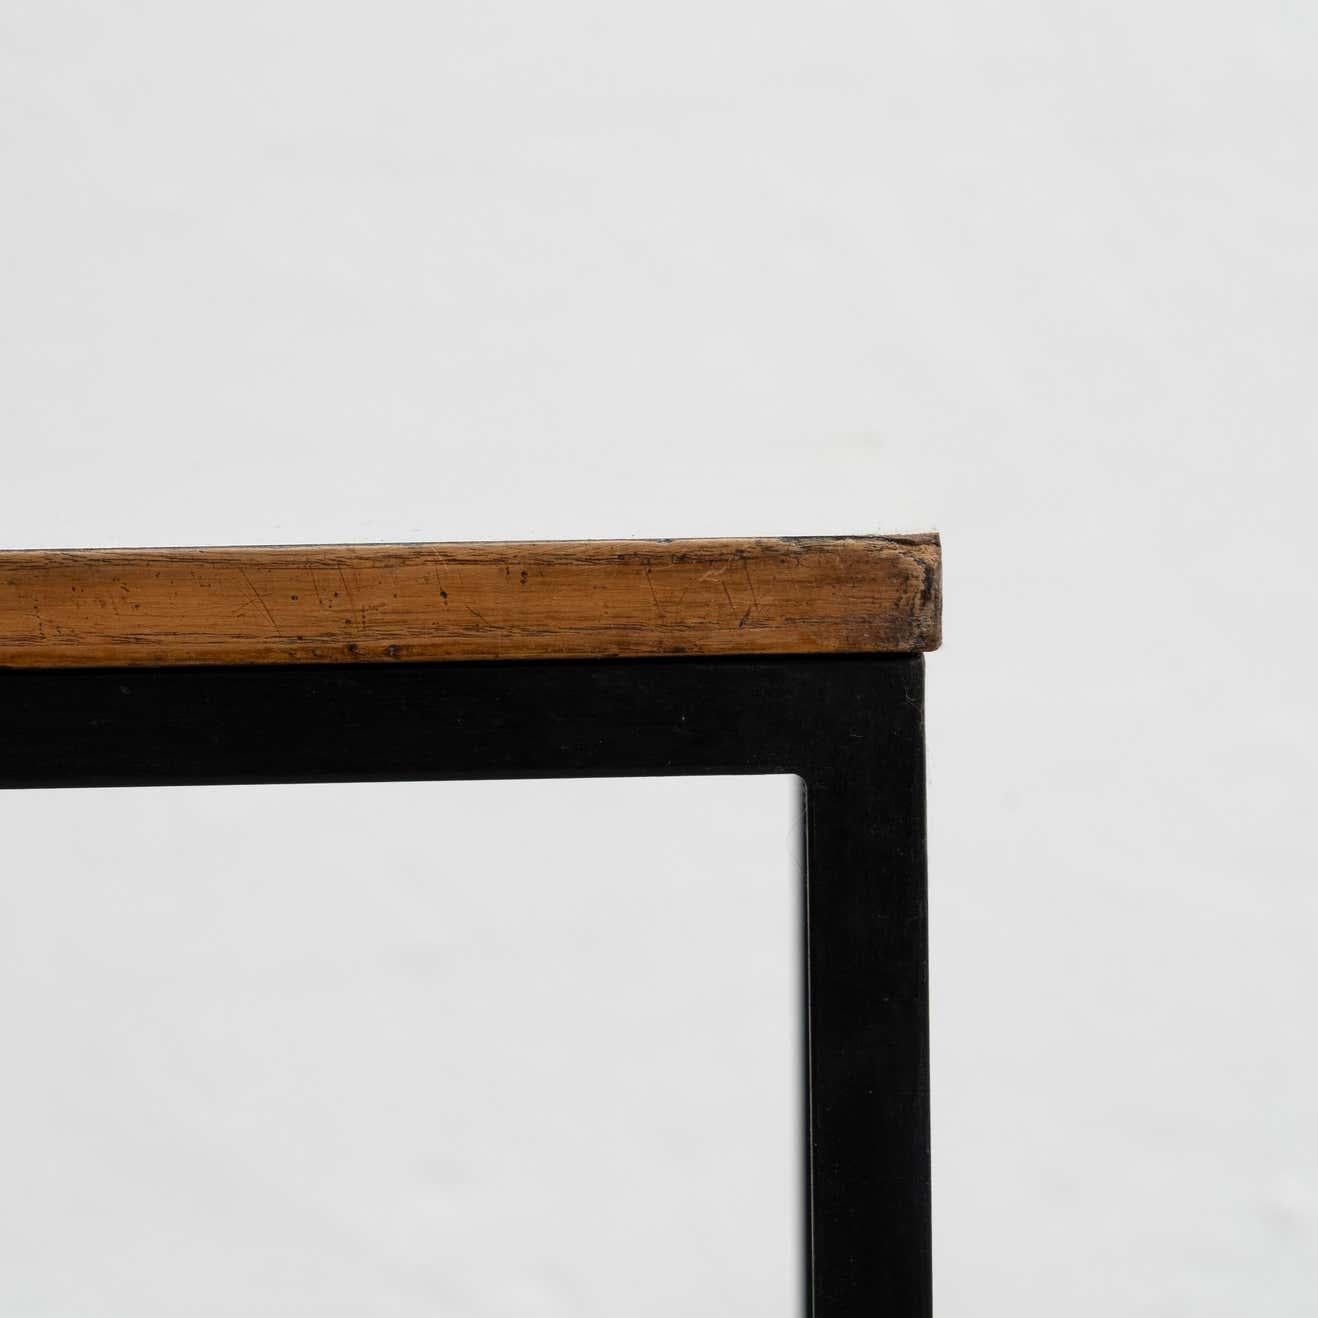 Steel Charlotte Perriand Metal, Wood and Formica Table for Cansado, circa 1950 For Sale